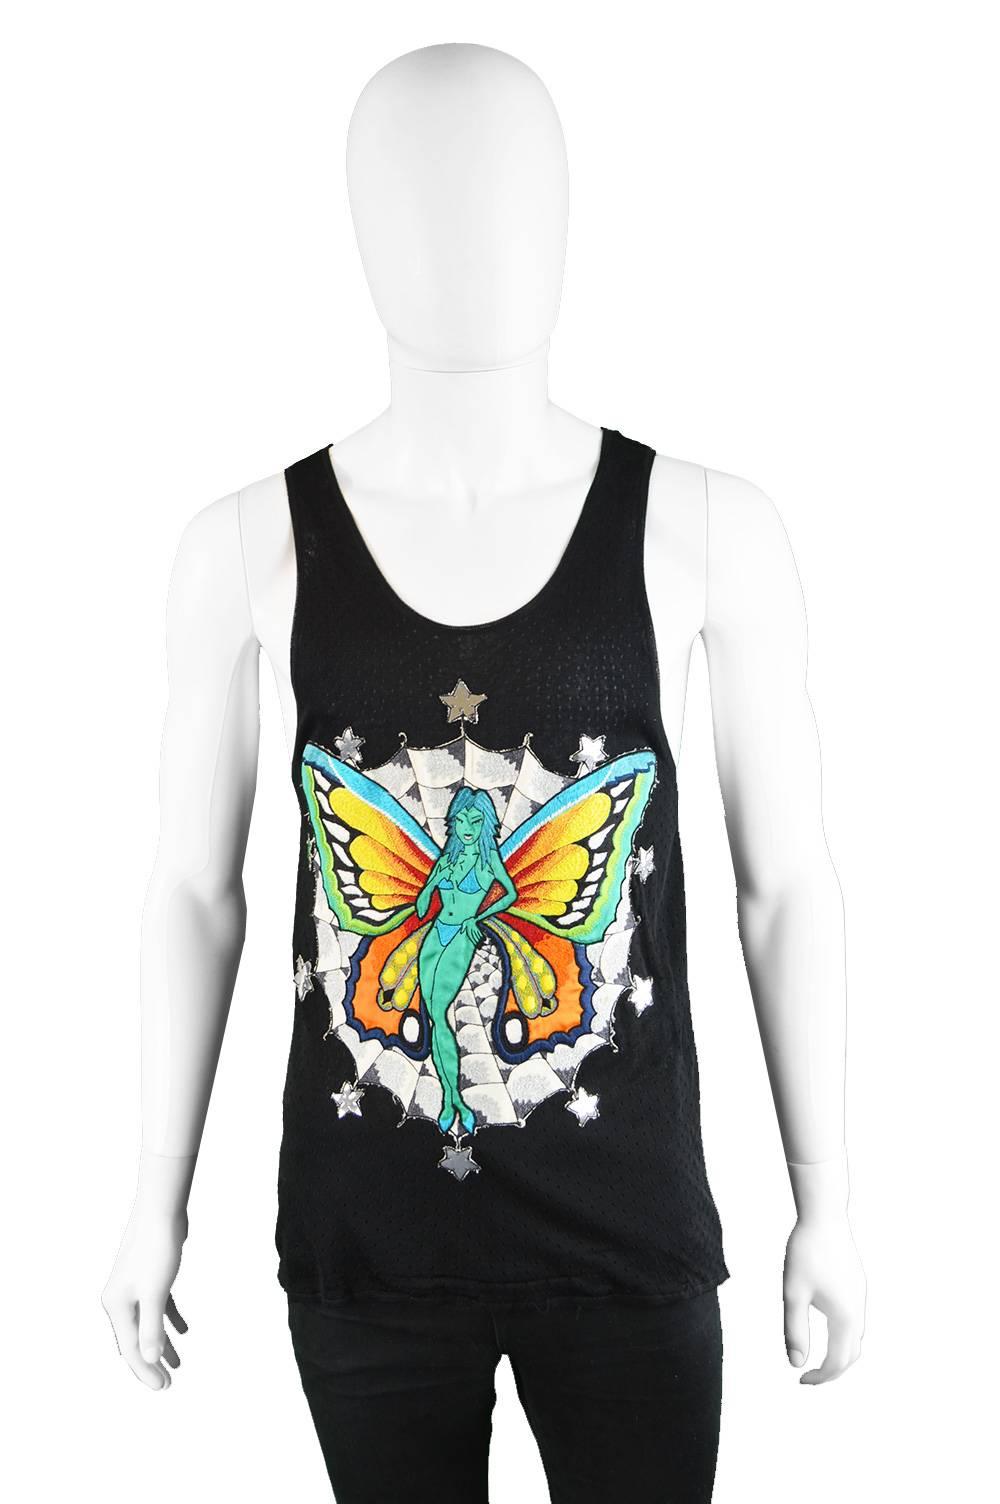 Black Tom Ford for Gucci Mens Rayon Knit Tank Top with Embroidered Fairy, S/S 2002 